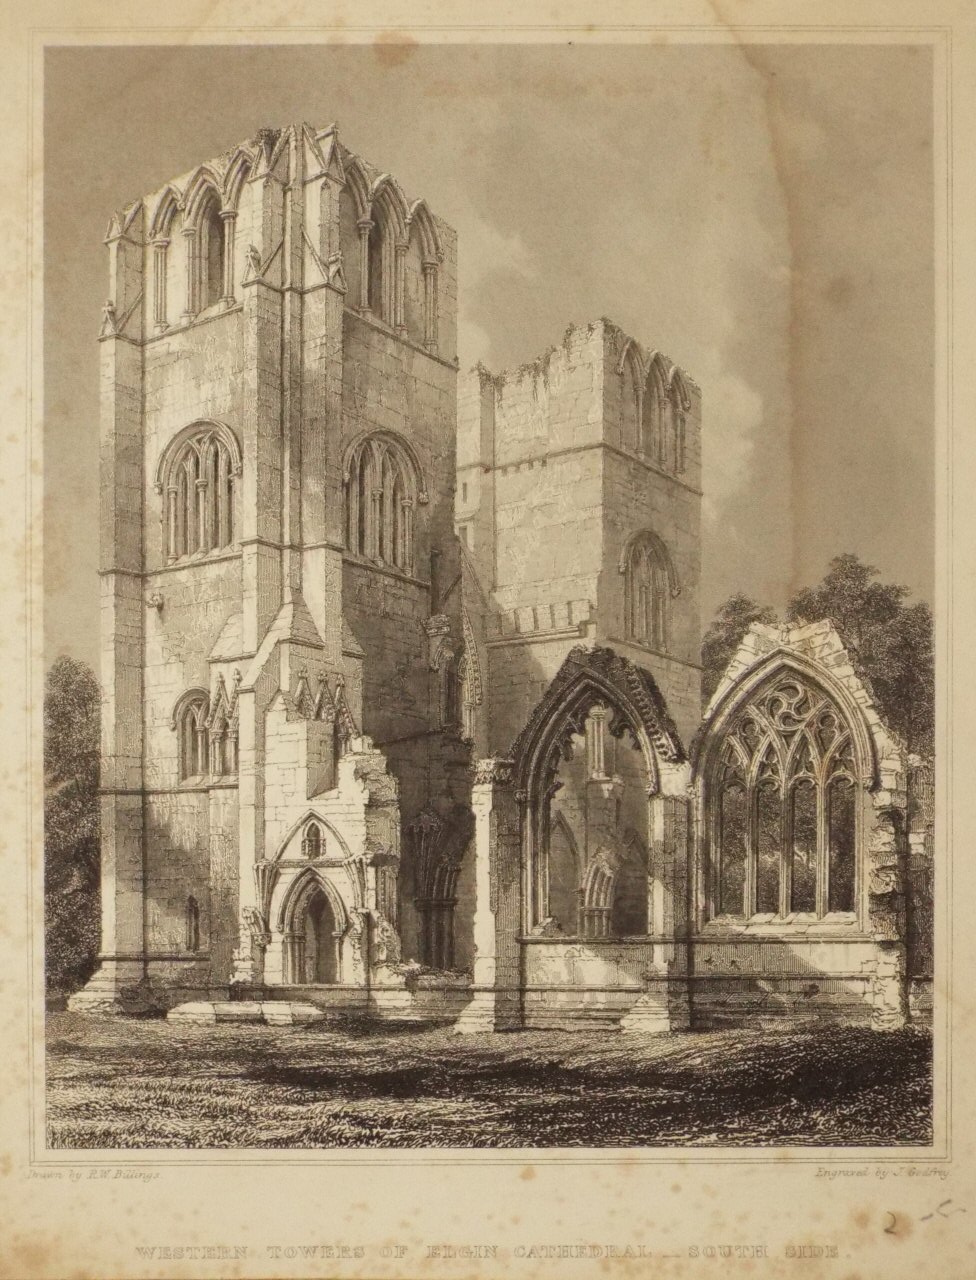 Print - Westrn Towers of Elgin Cathedral - South Side. - Godfrey